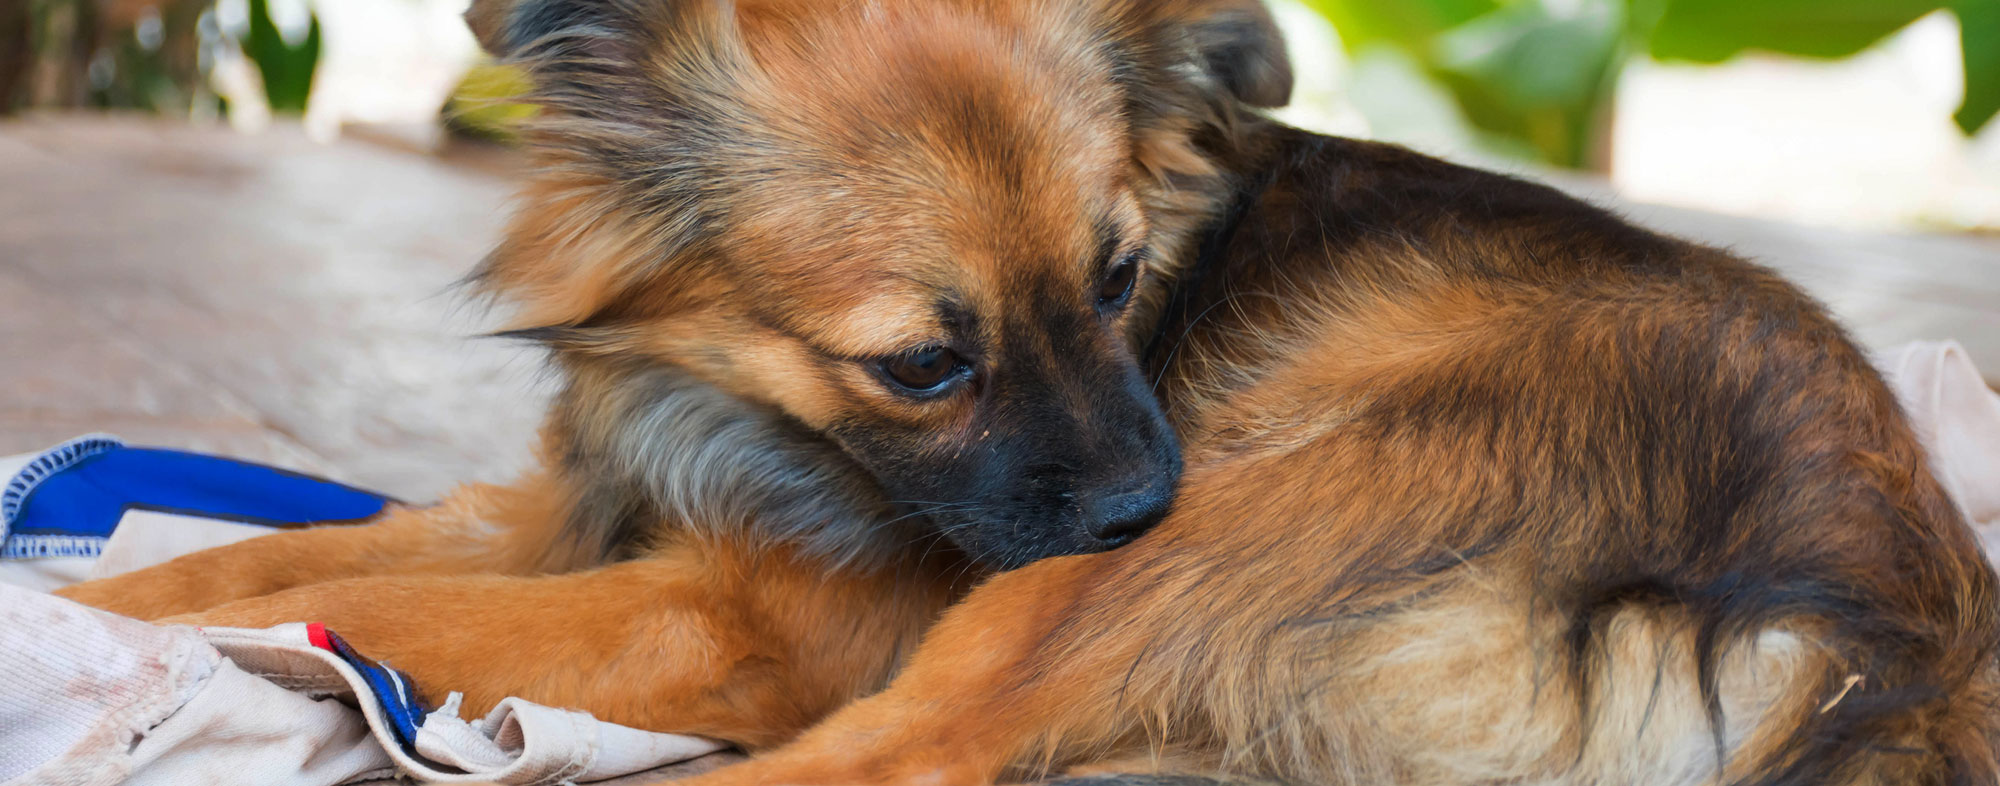 Dog chewing at a flea or tick bite. Learn how to prevent a flea or tick infestation on your pet or in your home.